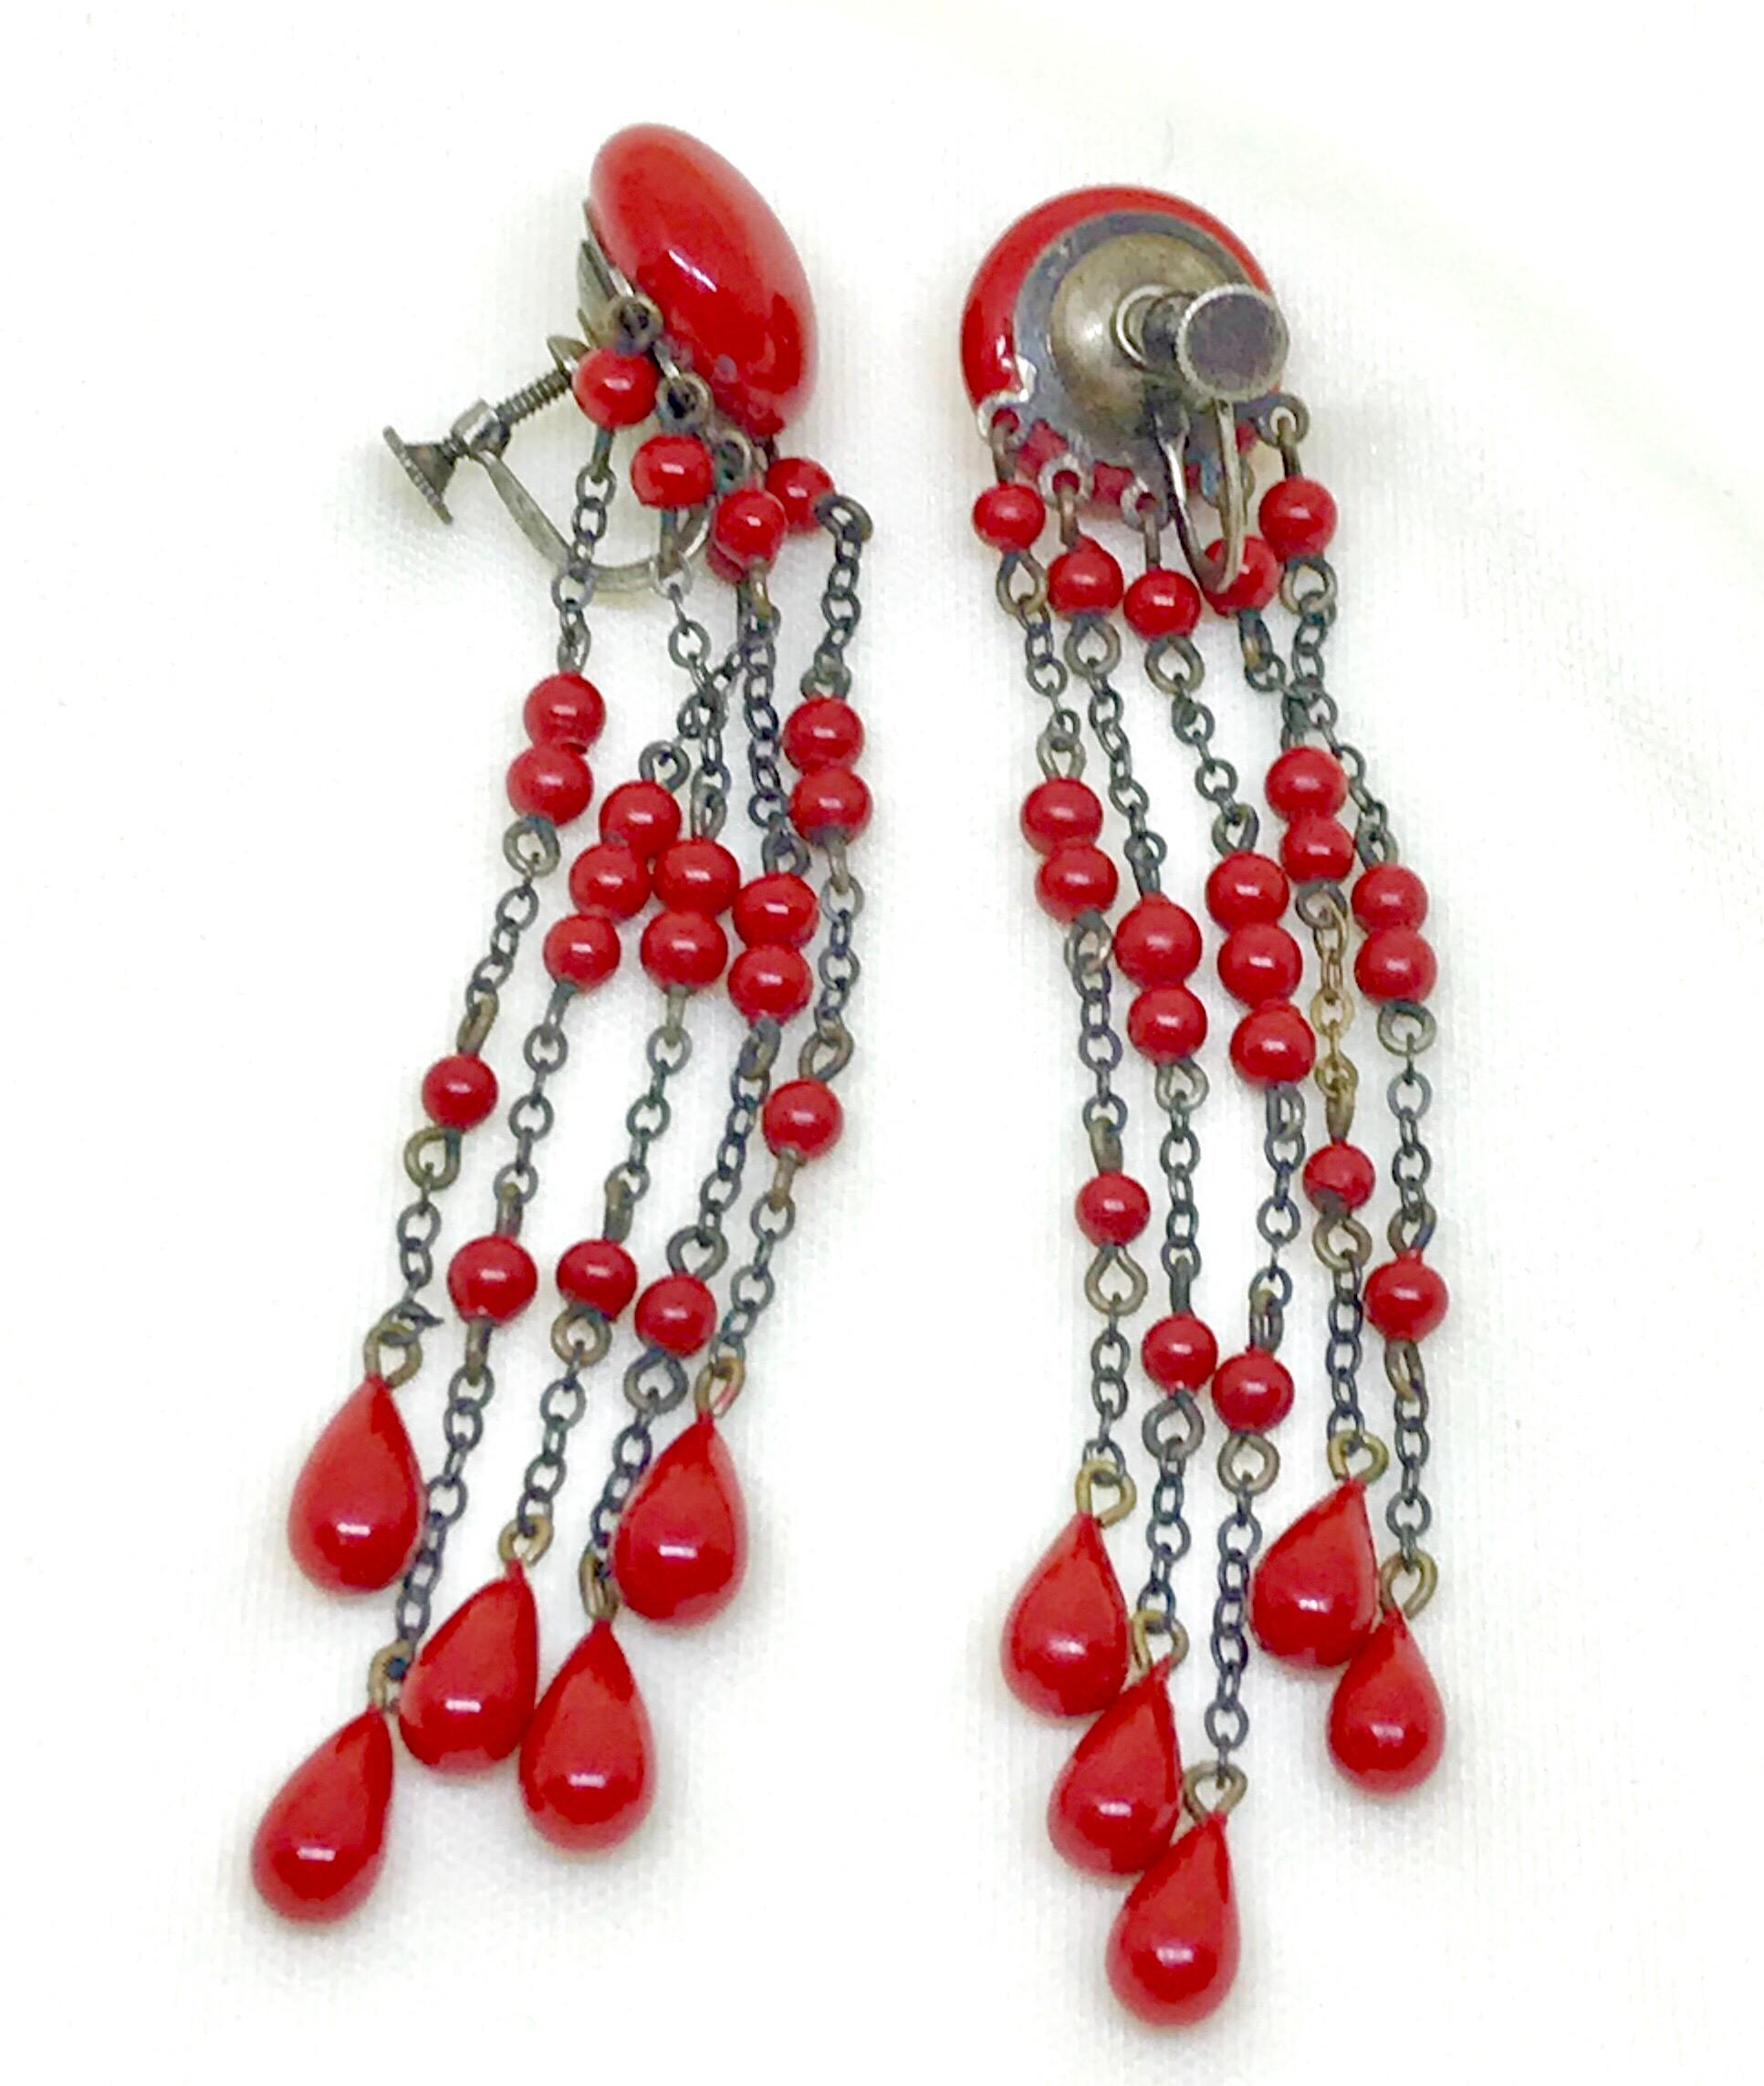 Circa 1920s Deco-Era Red Bead Dangling Earrings  In Good Condition For Sale In Long Beach, CA